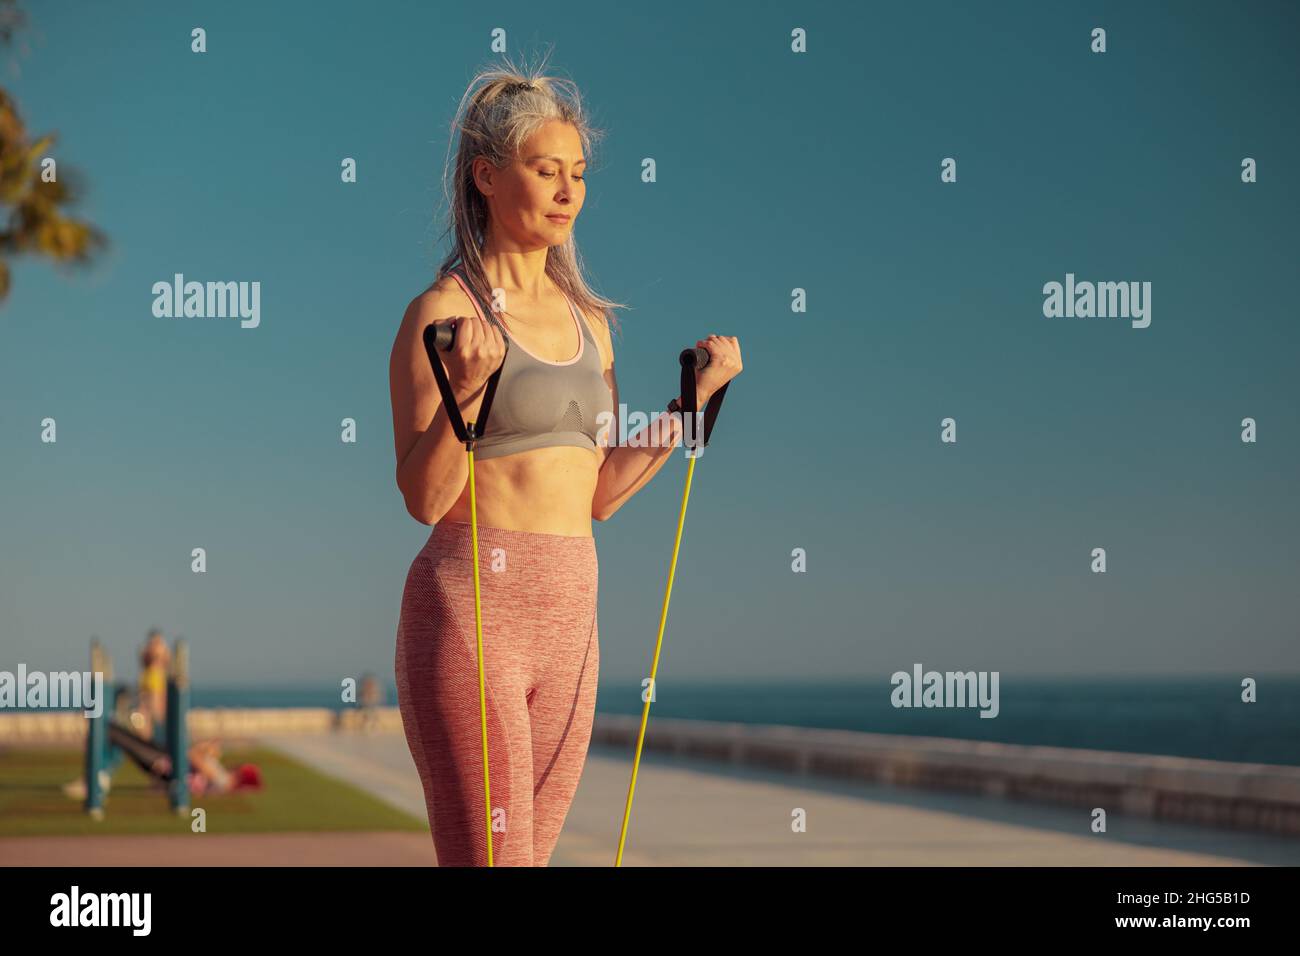 Portrait of woman exercising with fitness resistance bands on the sports site on seashore Stock Photo